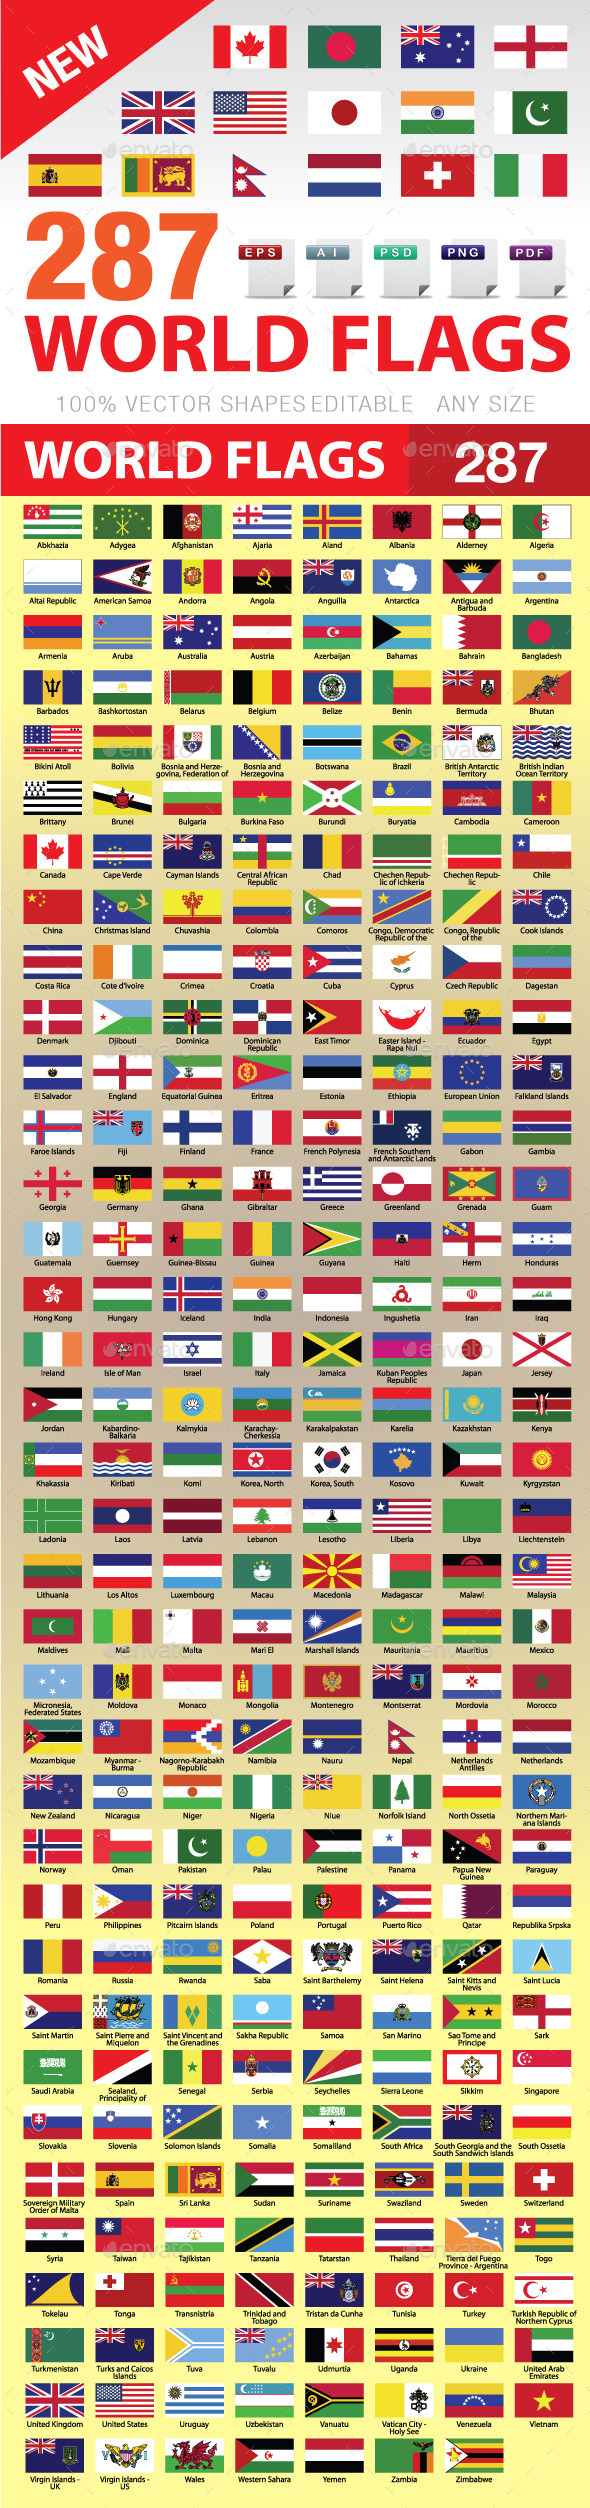 285-world-flags-with-names